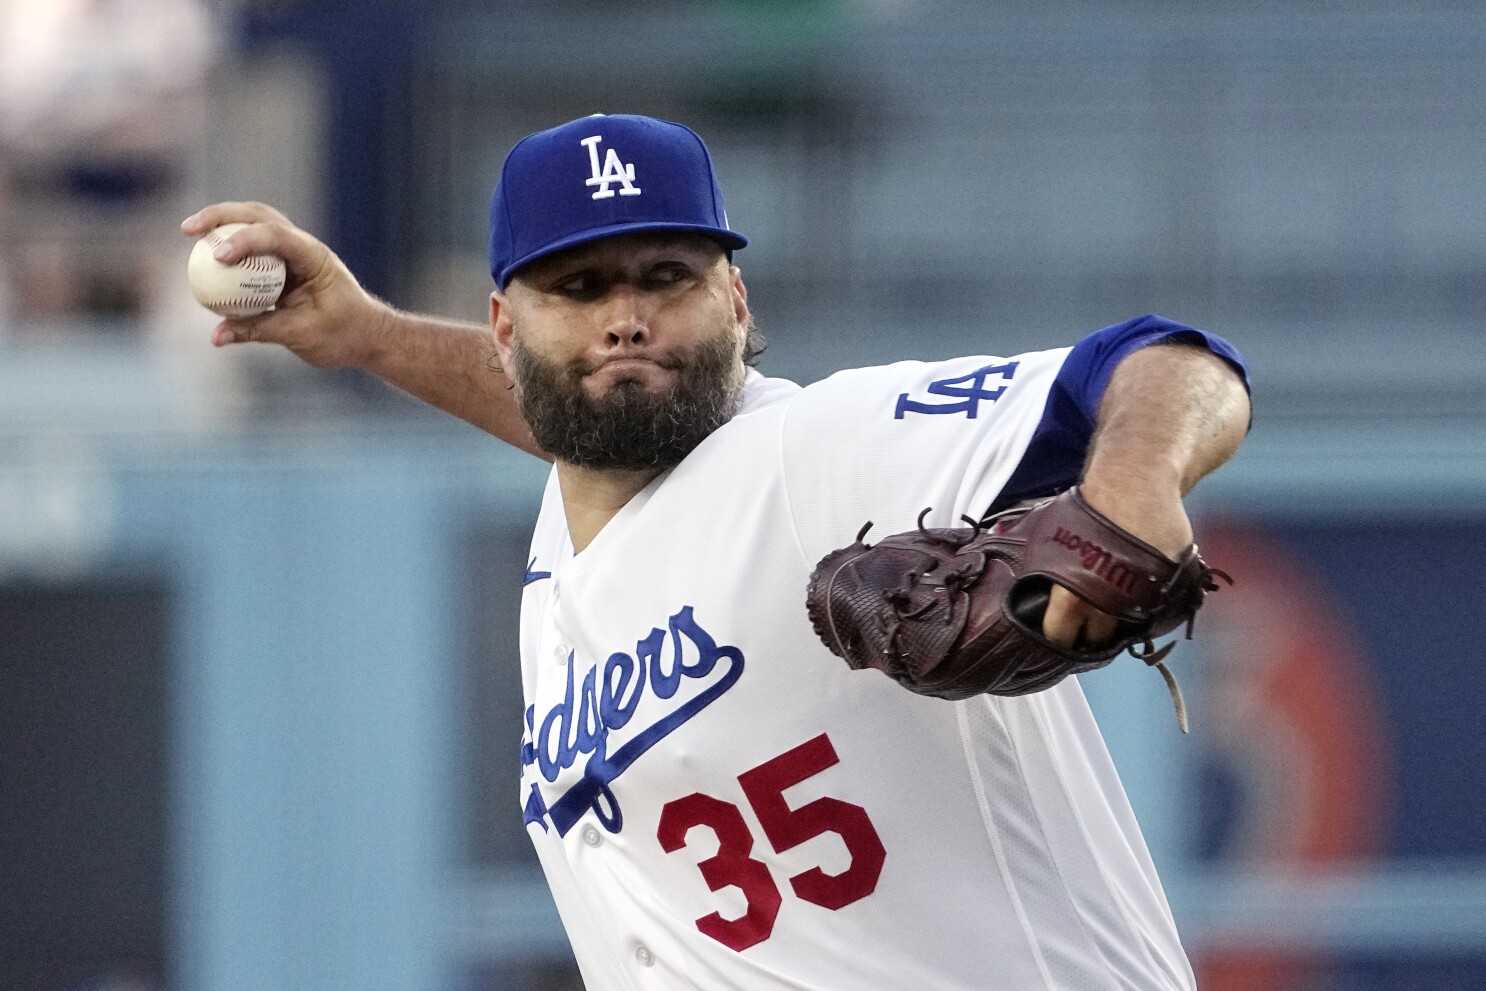 Lance Lynn gives up 3 solo homers in Dodgers debut and LA beats